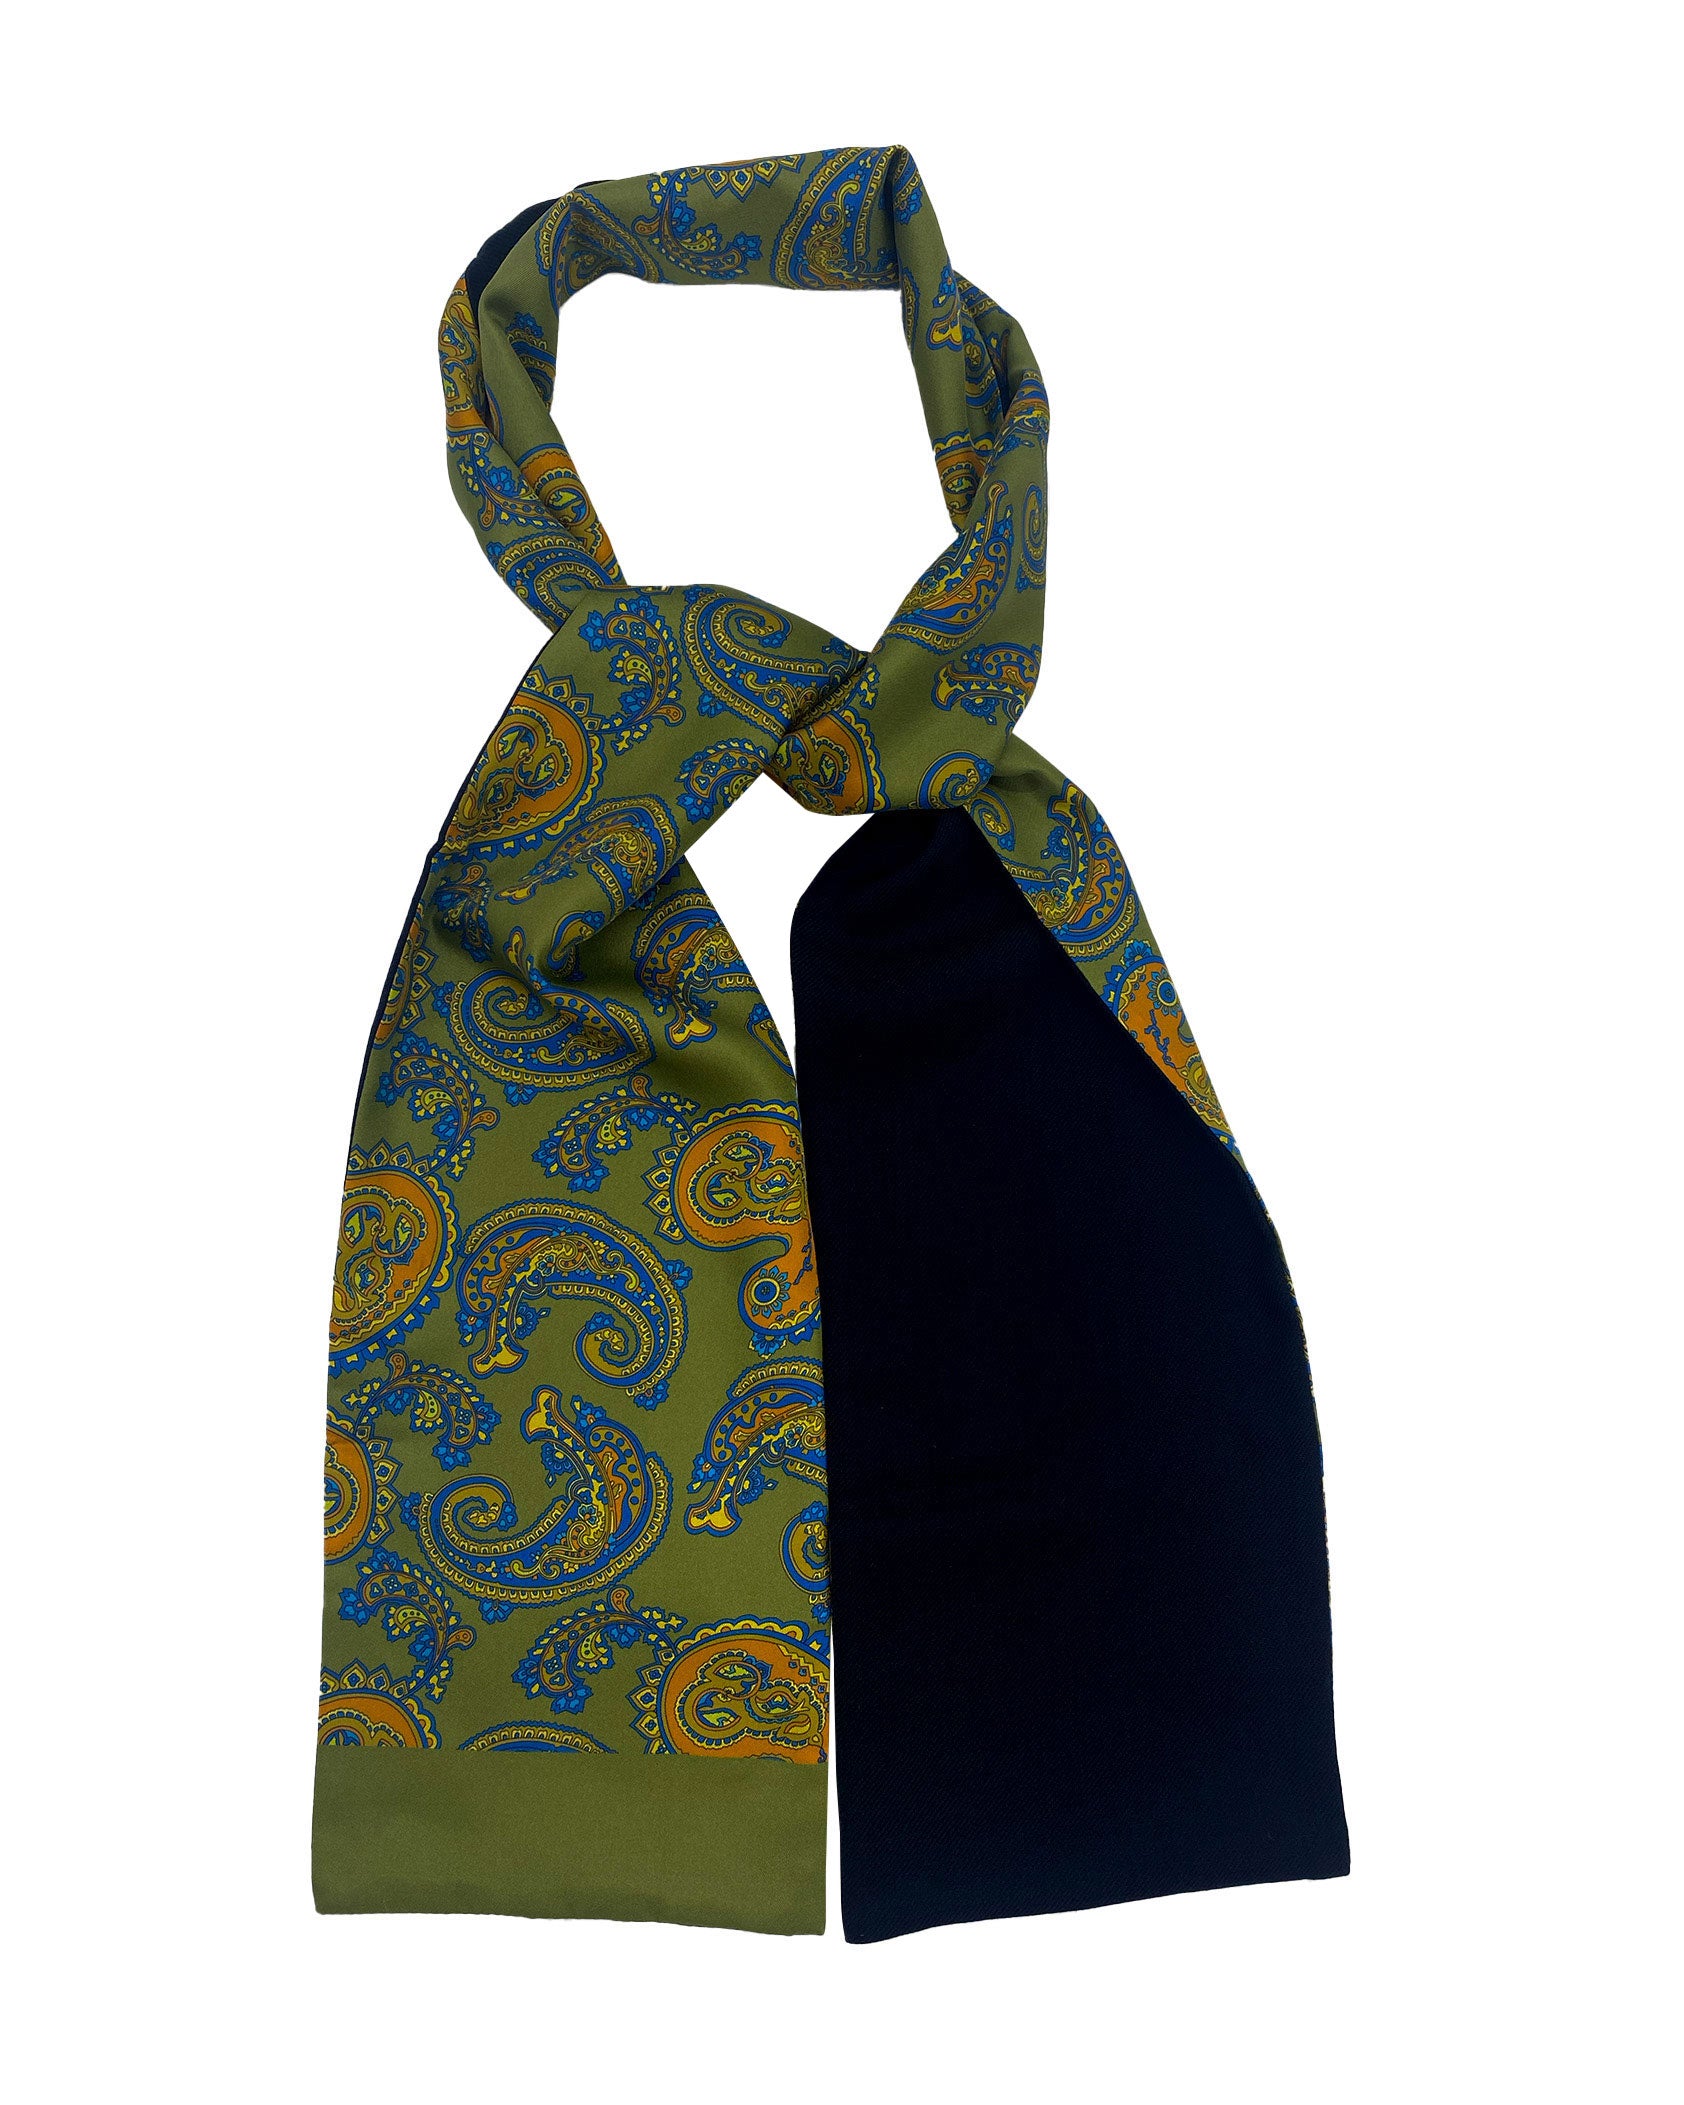 The Carlisle wool-backed silk scarf looped and knotted, demonstrating the length, width, pattern on silk and the fine woollen underside.